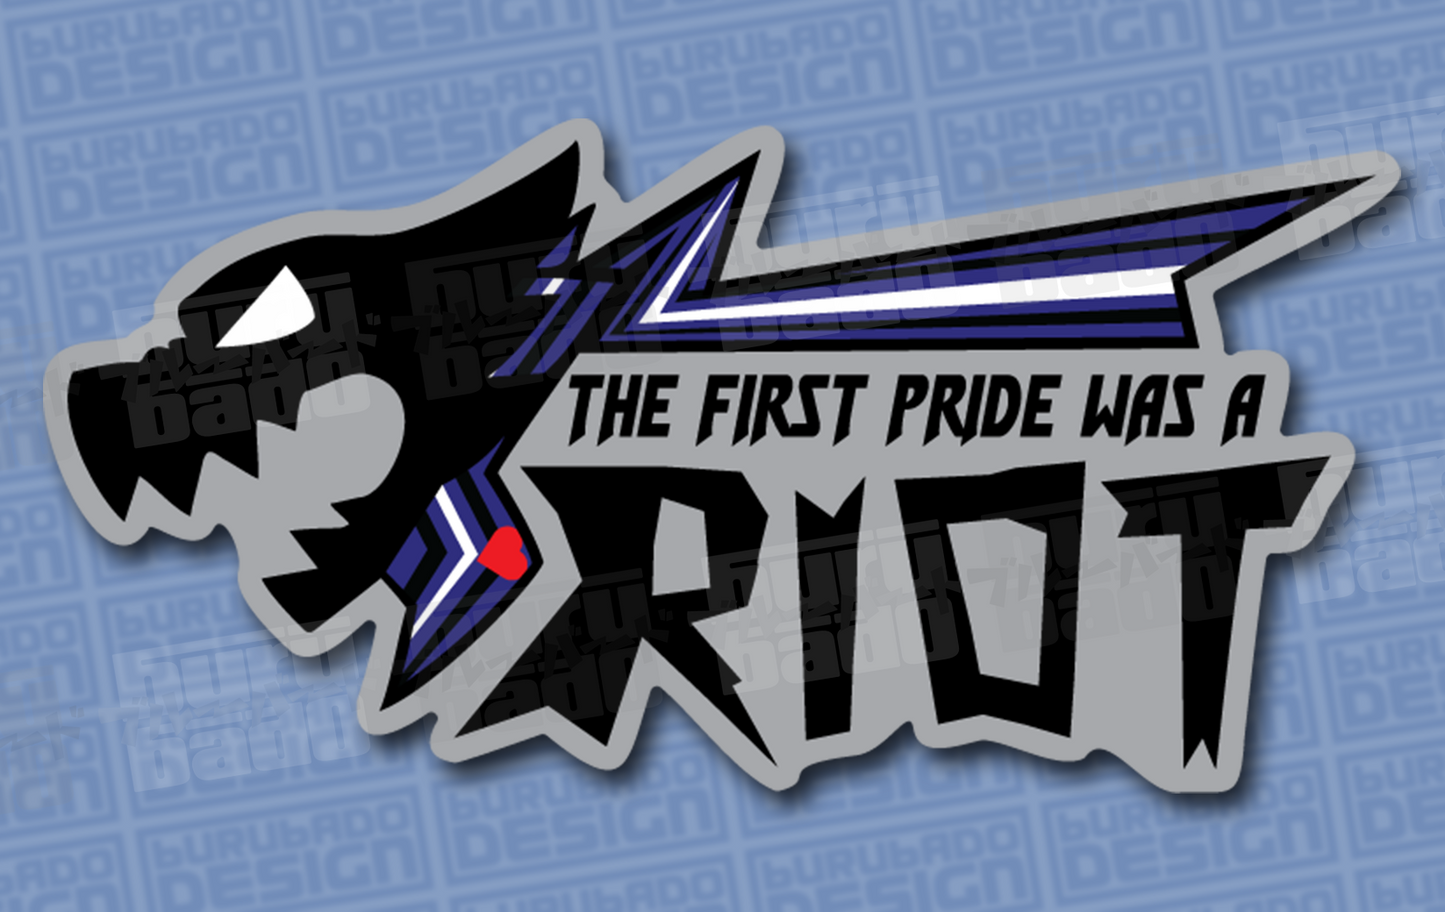 THE FIRST PRIDE WAS A RIOT stickers